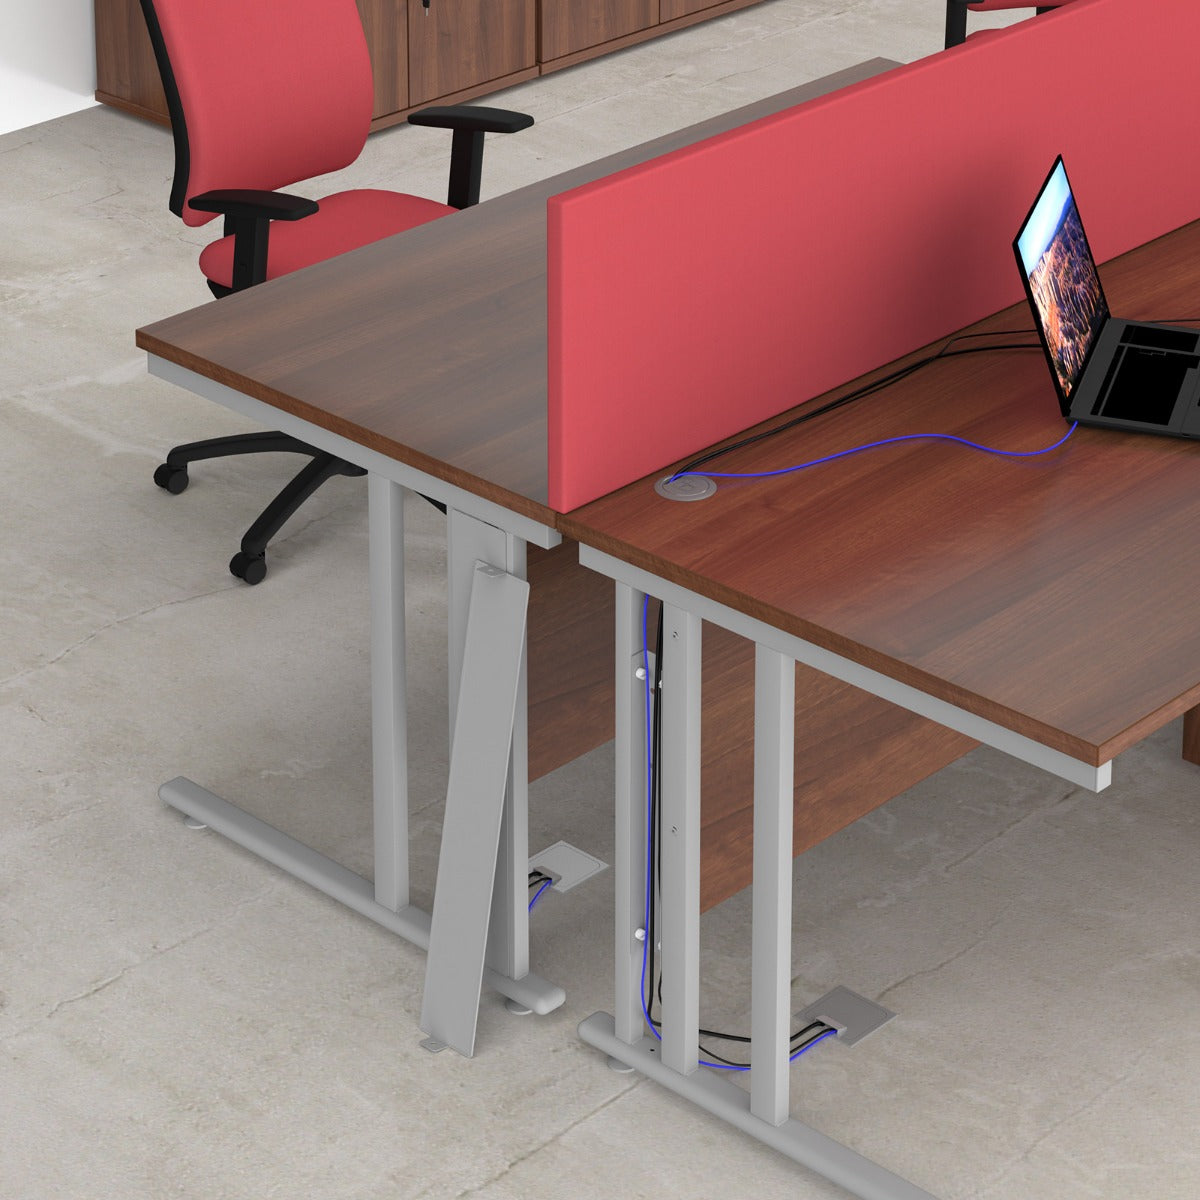 Maestro 800mm Deep Straight Cable Management Leg Office Desk with Two and Three Drawer Pedestal